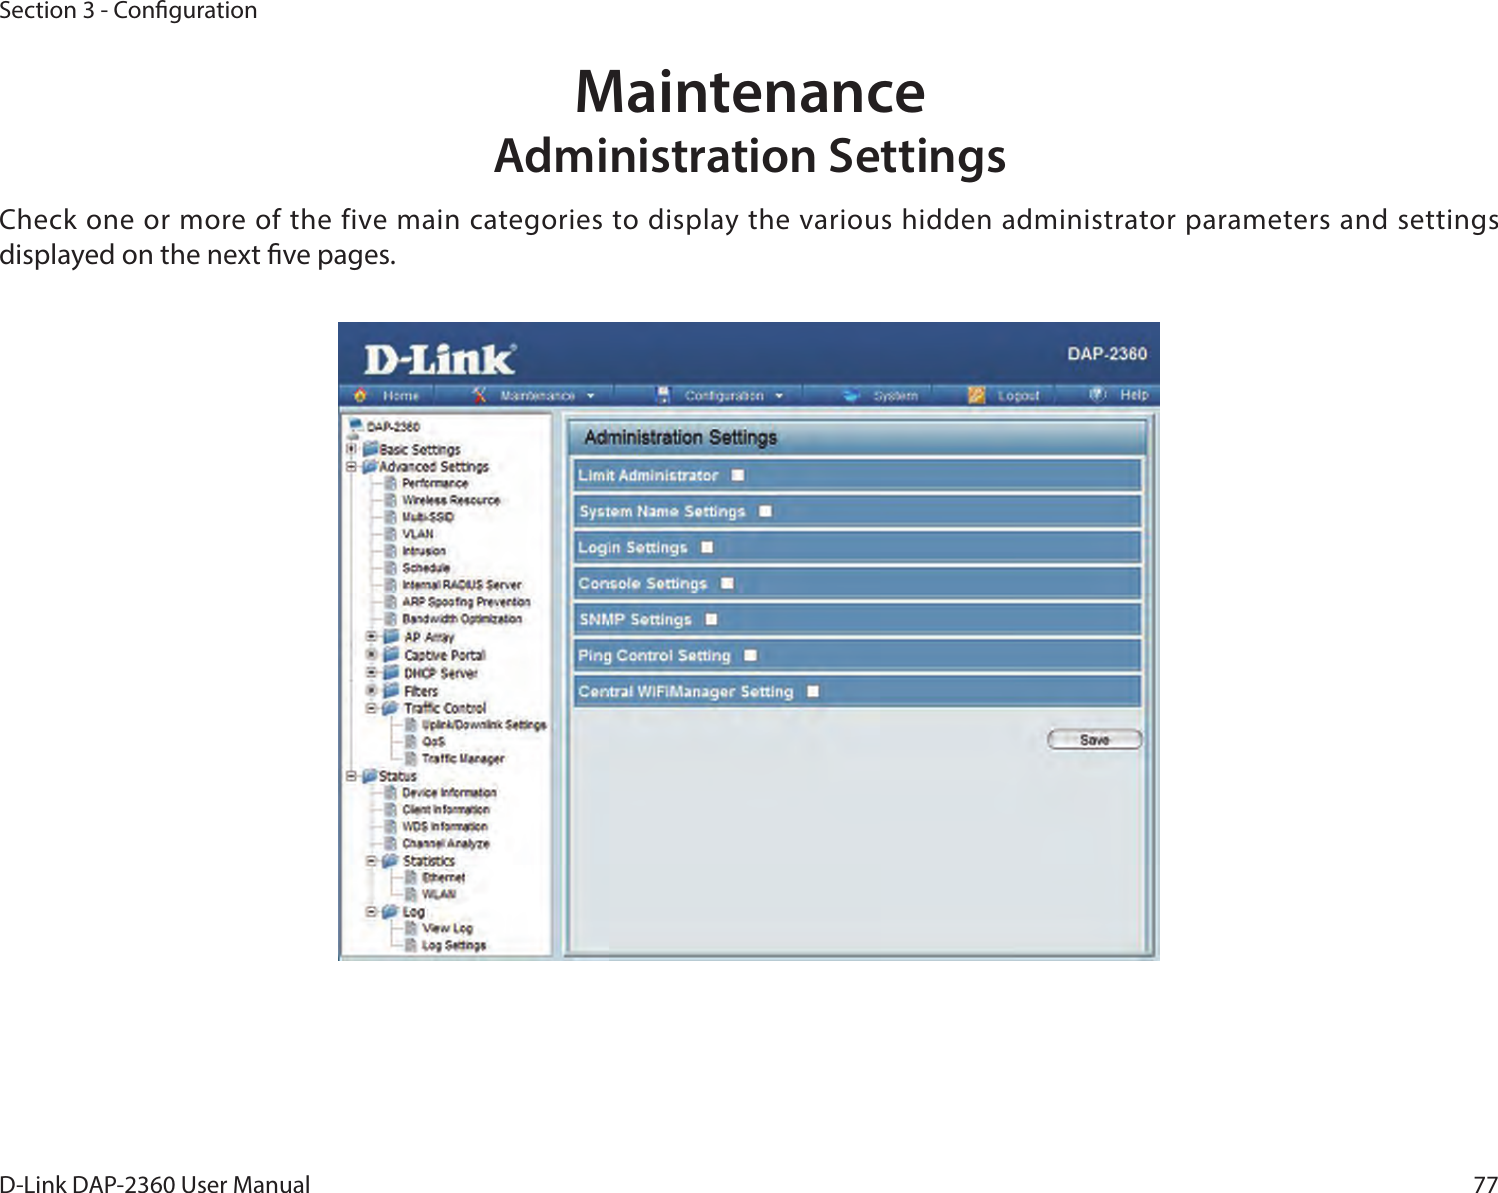 77D-Link DAP-2360 User ManualSection 3 - CongurationCheck one or more of the five main categories to display the various hidden administrator parameters and settings displayed on the next ve pages.  Maintenance Administration Settings